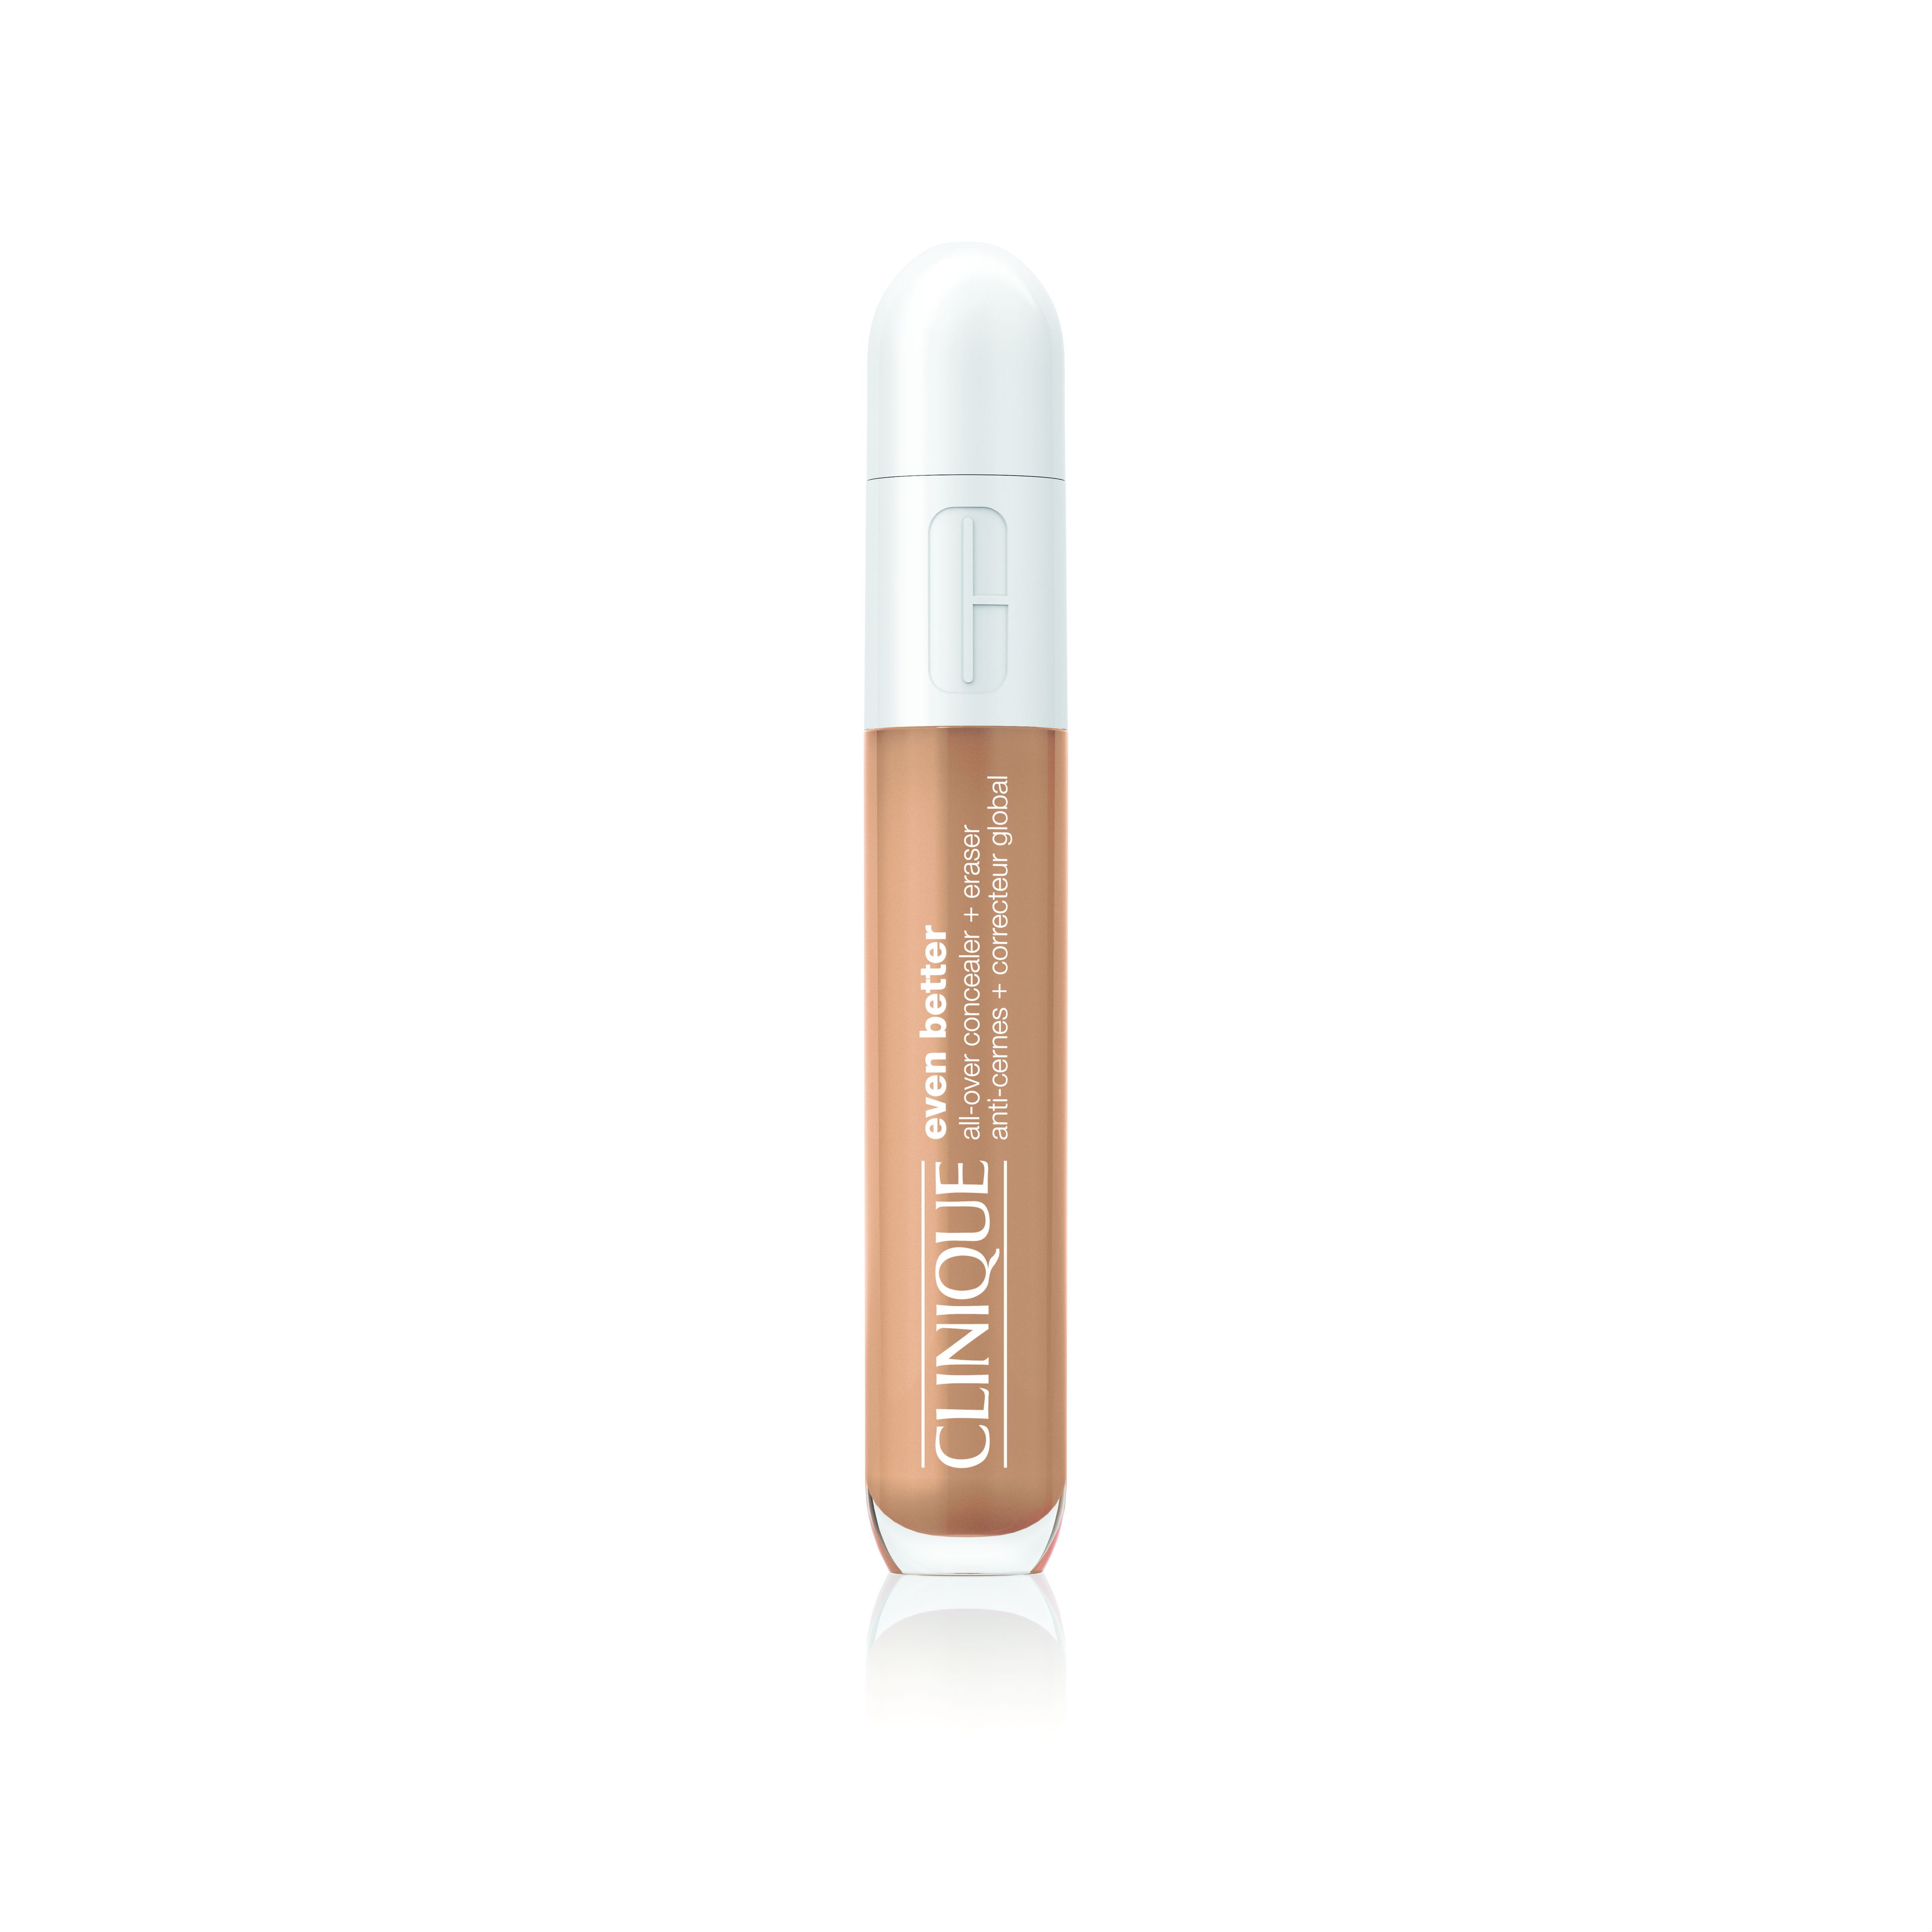 Clinique Even Better All Over Concealer 1